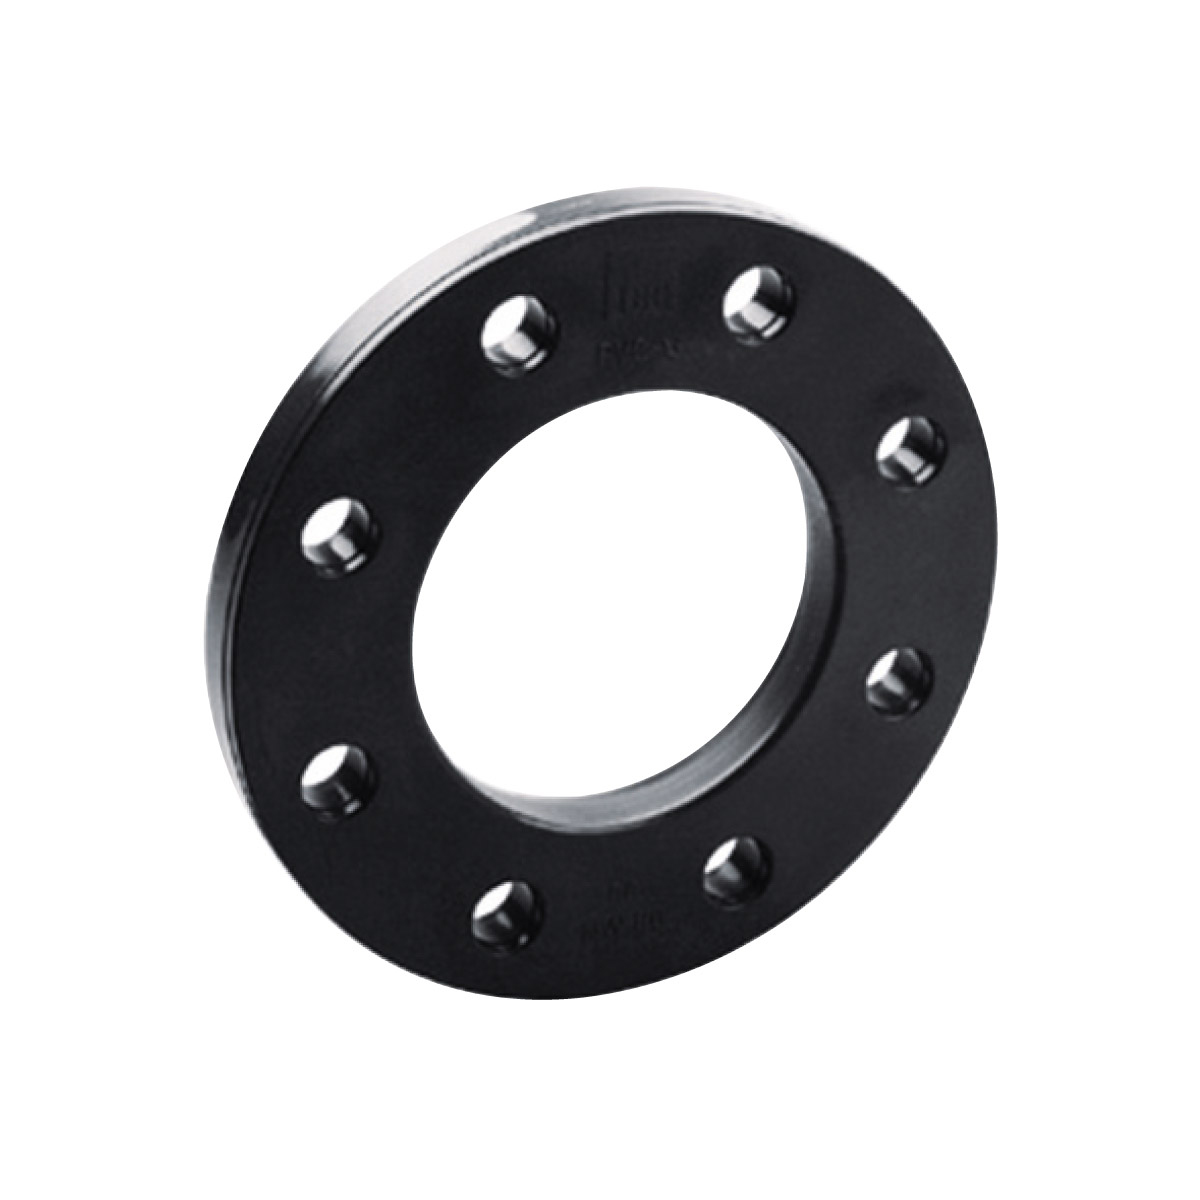 IBG® flange adapter connection dimensions DIN/ISO, PVC-U d16 IBG® flange adapter connection dimensions DIN/ISO, PVC-U d16